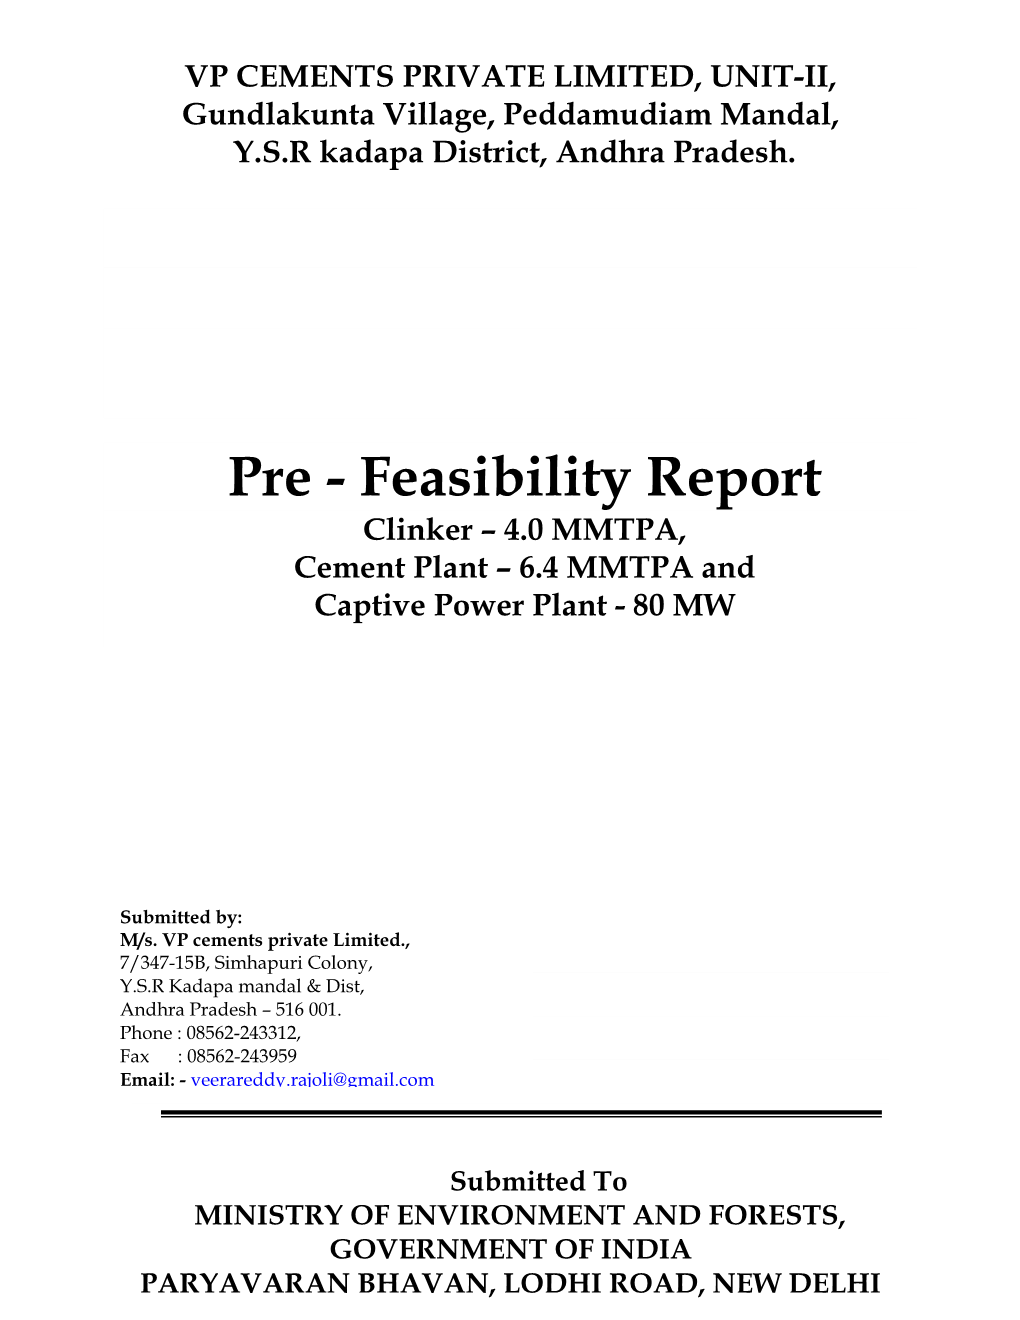 Pre - Feasibility Report Clinker – 4.0 MMTPA, Cement Plant – 6.4 MMTPA and Captive Power Plant - 80 MW